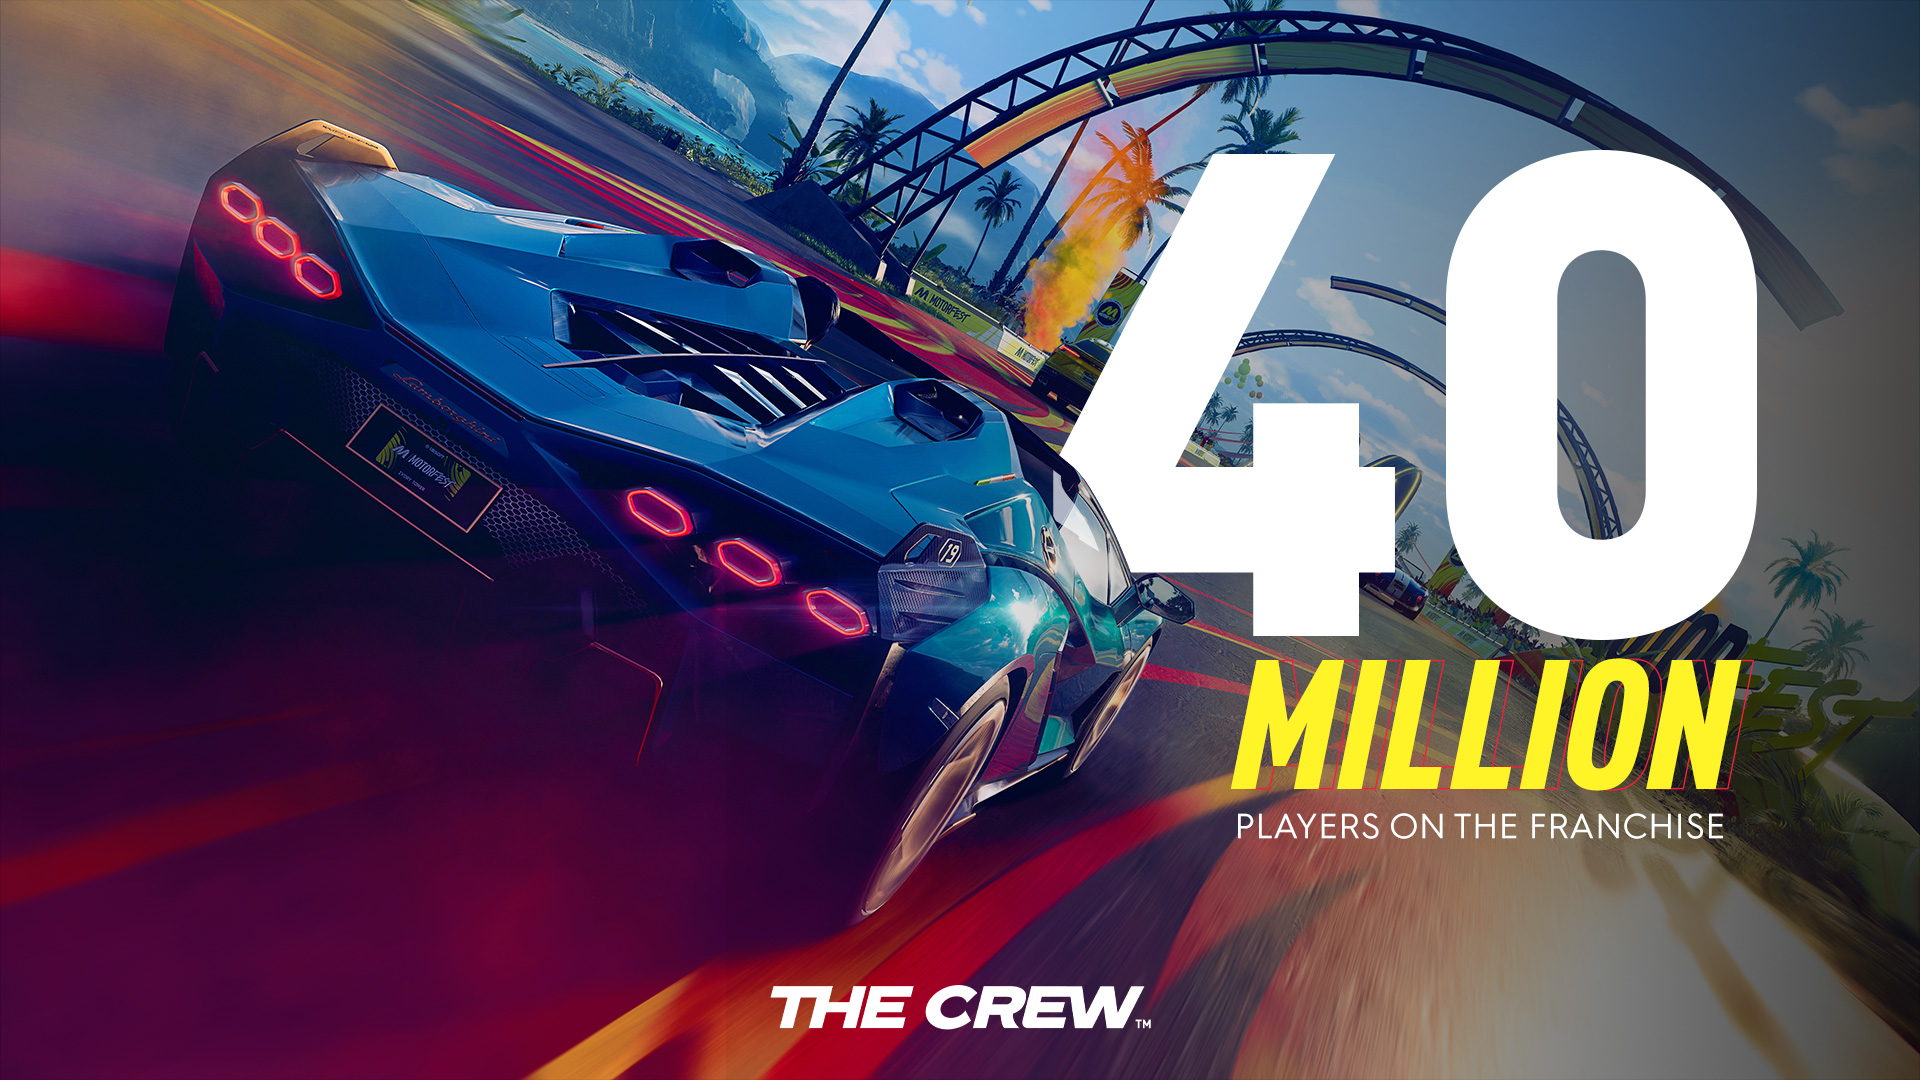 The Crew series exceeds 40 million players